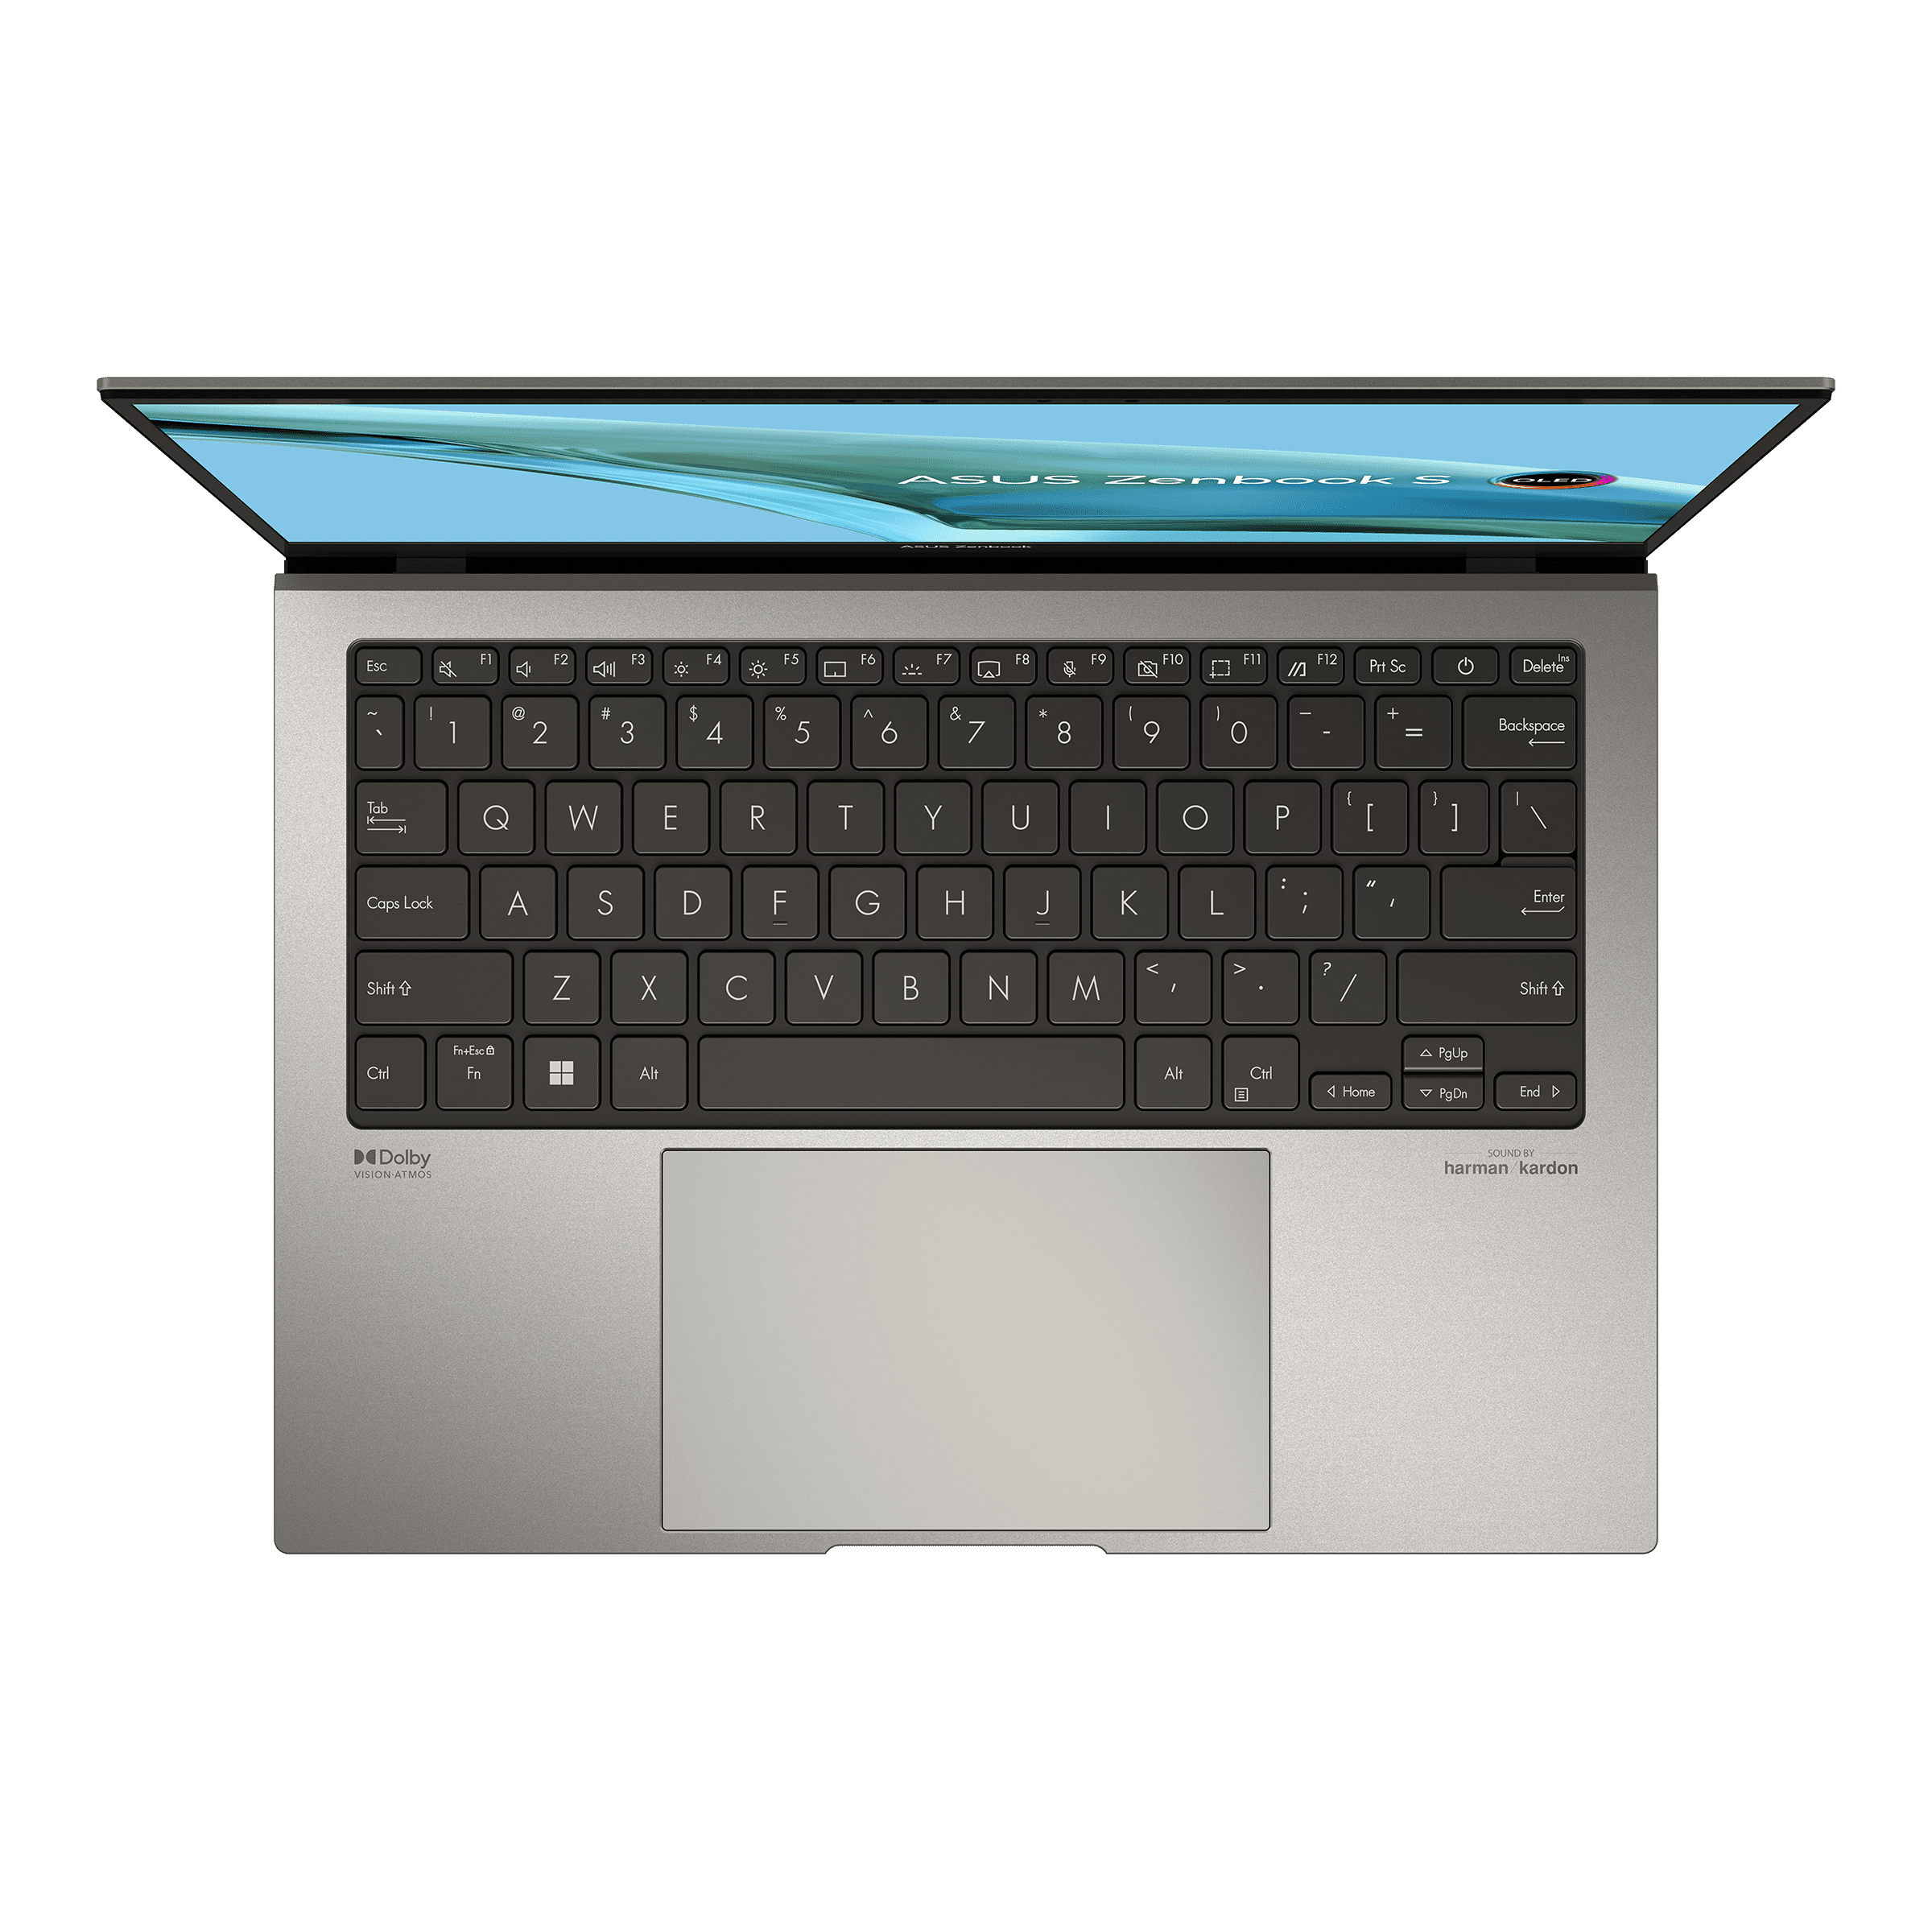 ASUS Zenbook S 13 OLED (UX5304)｜Laptops For Home｜ASUS USA